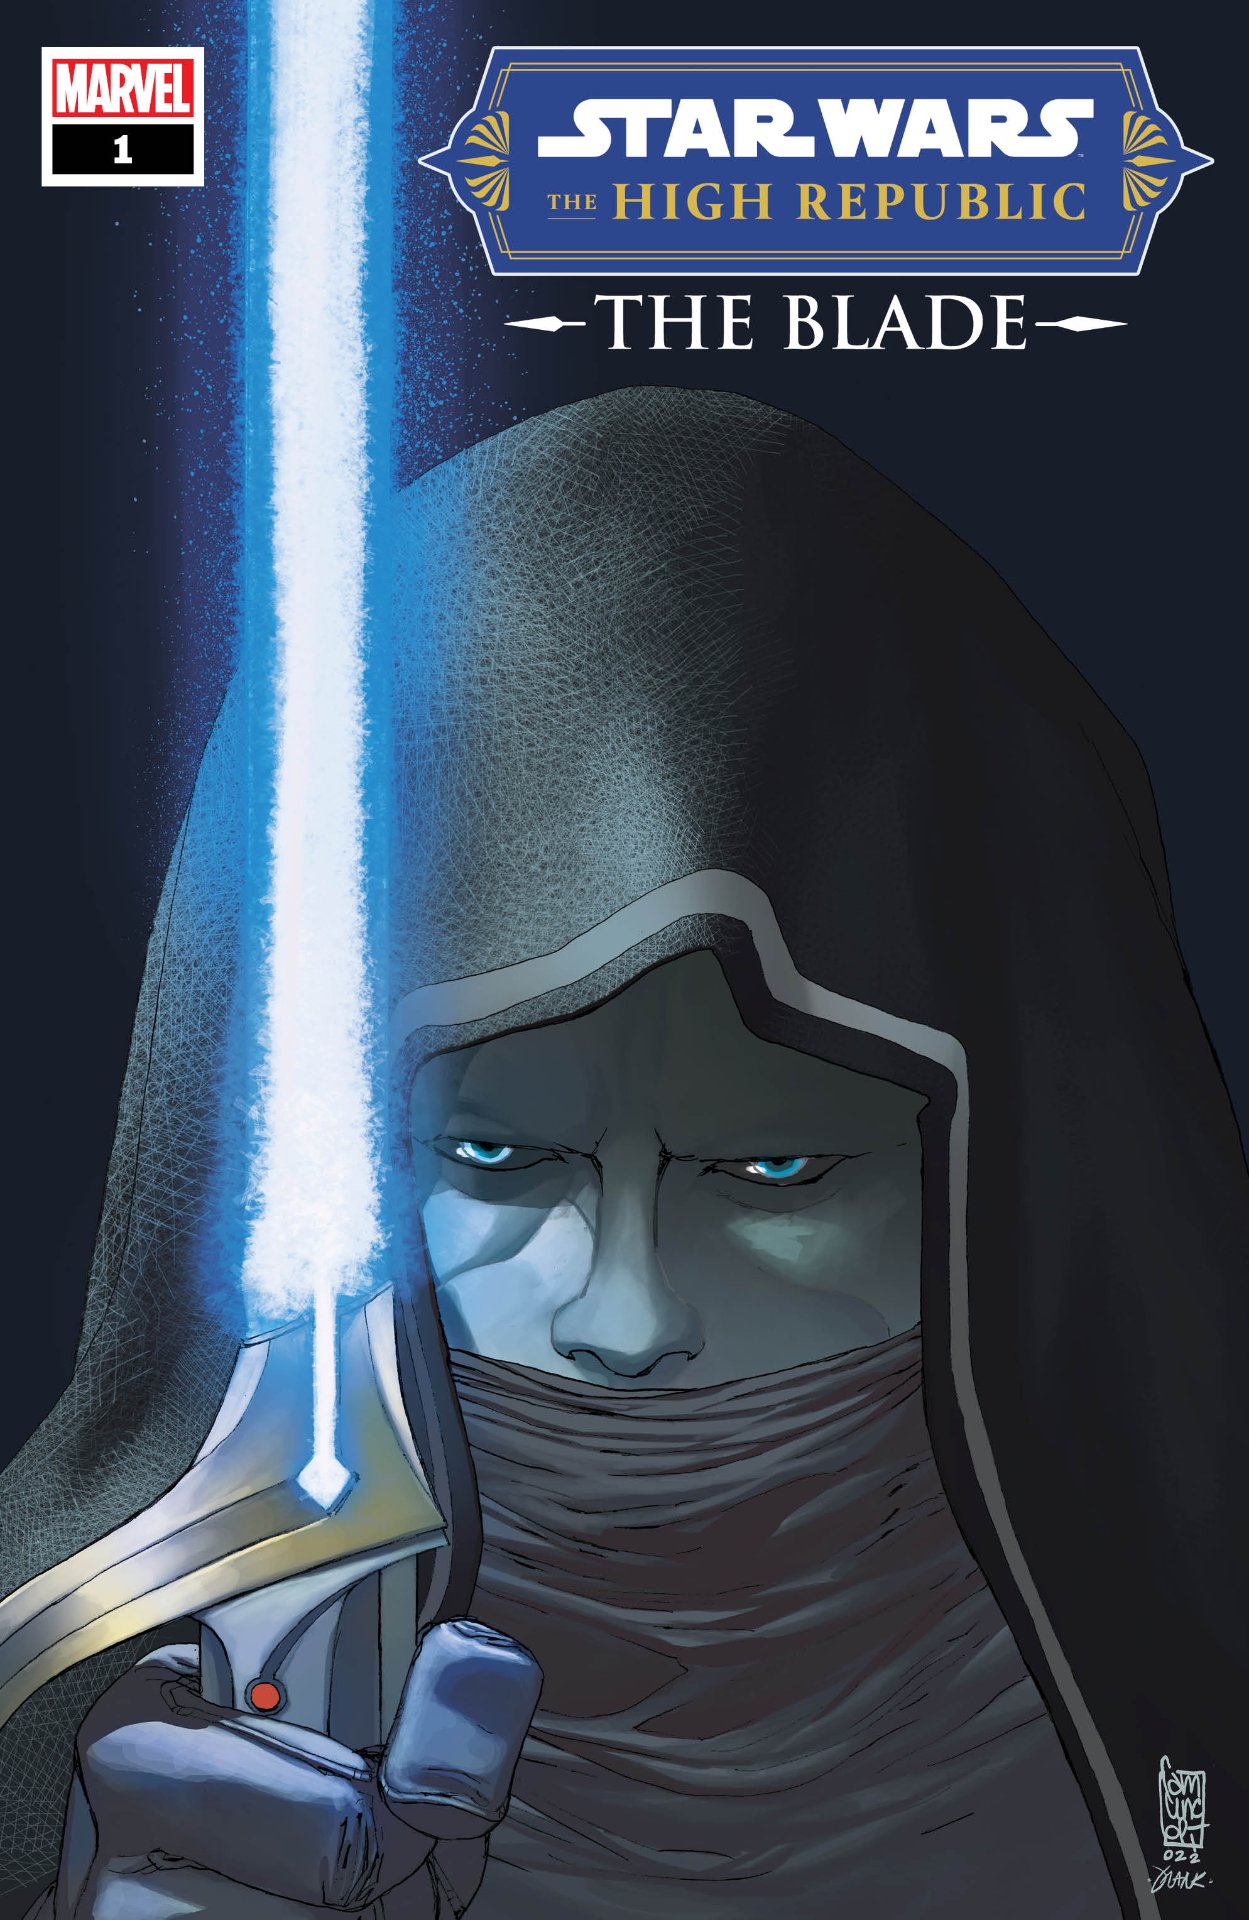 Star Wars: The High Republic – The Blade #1 cover